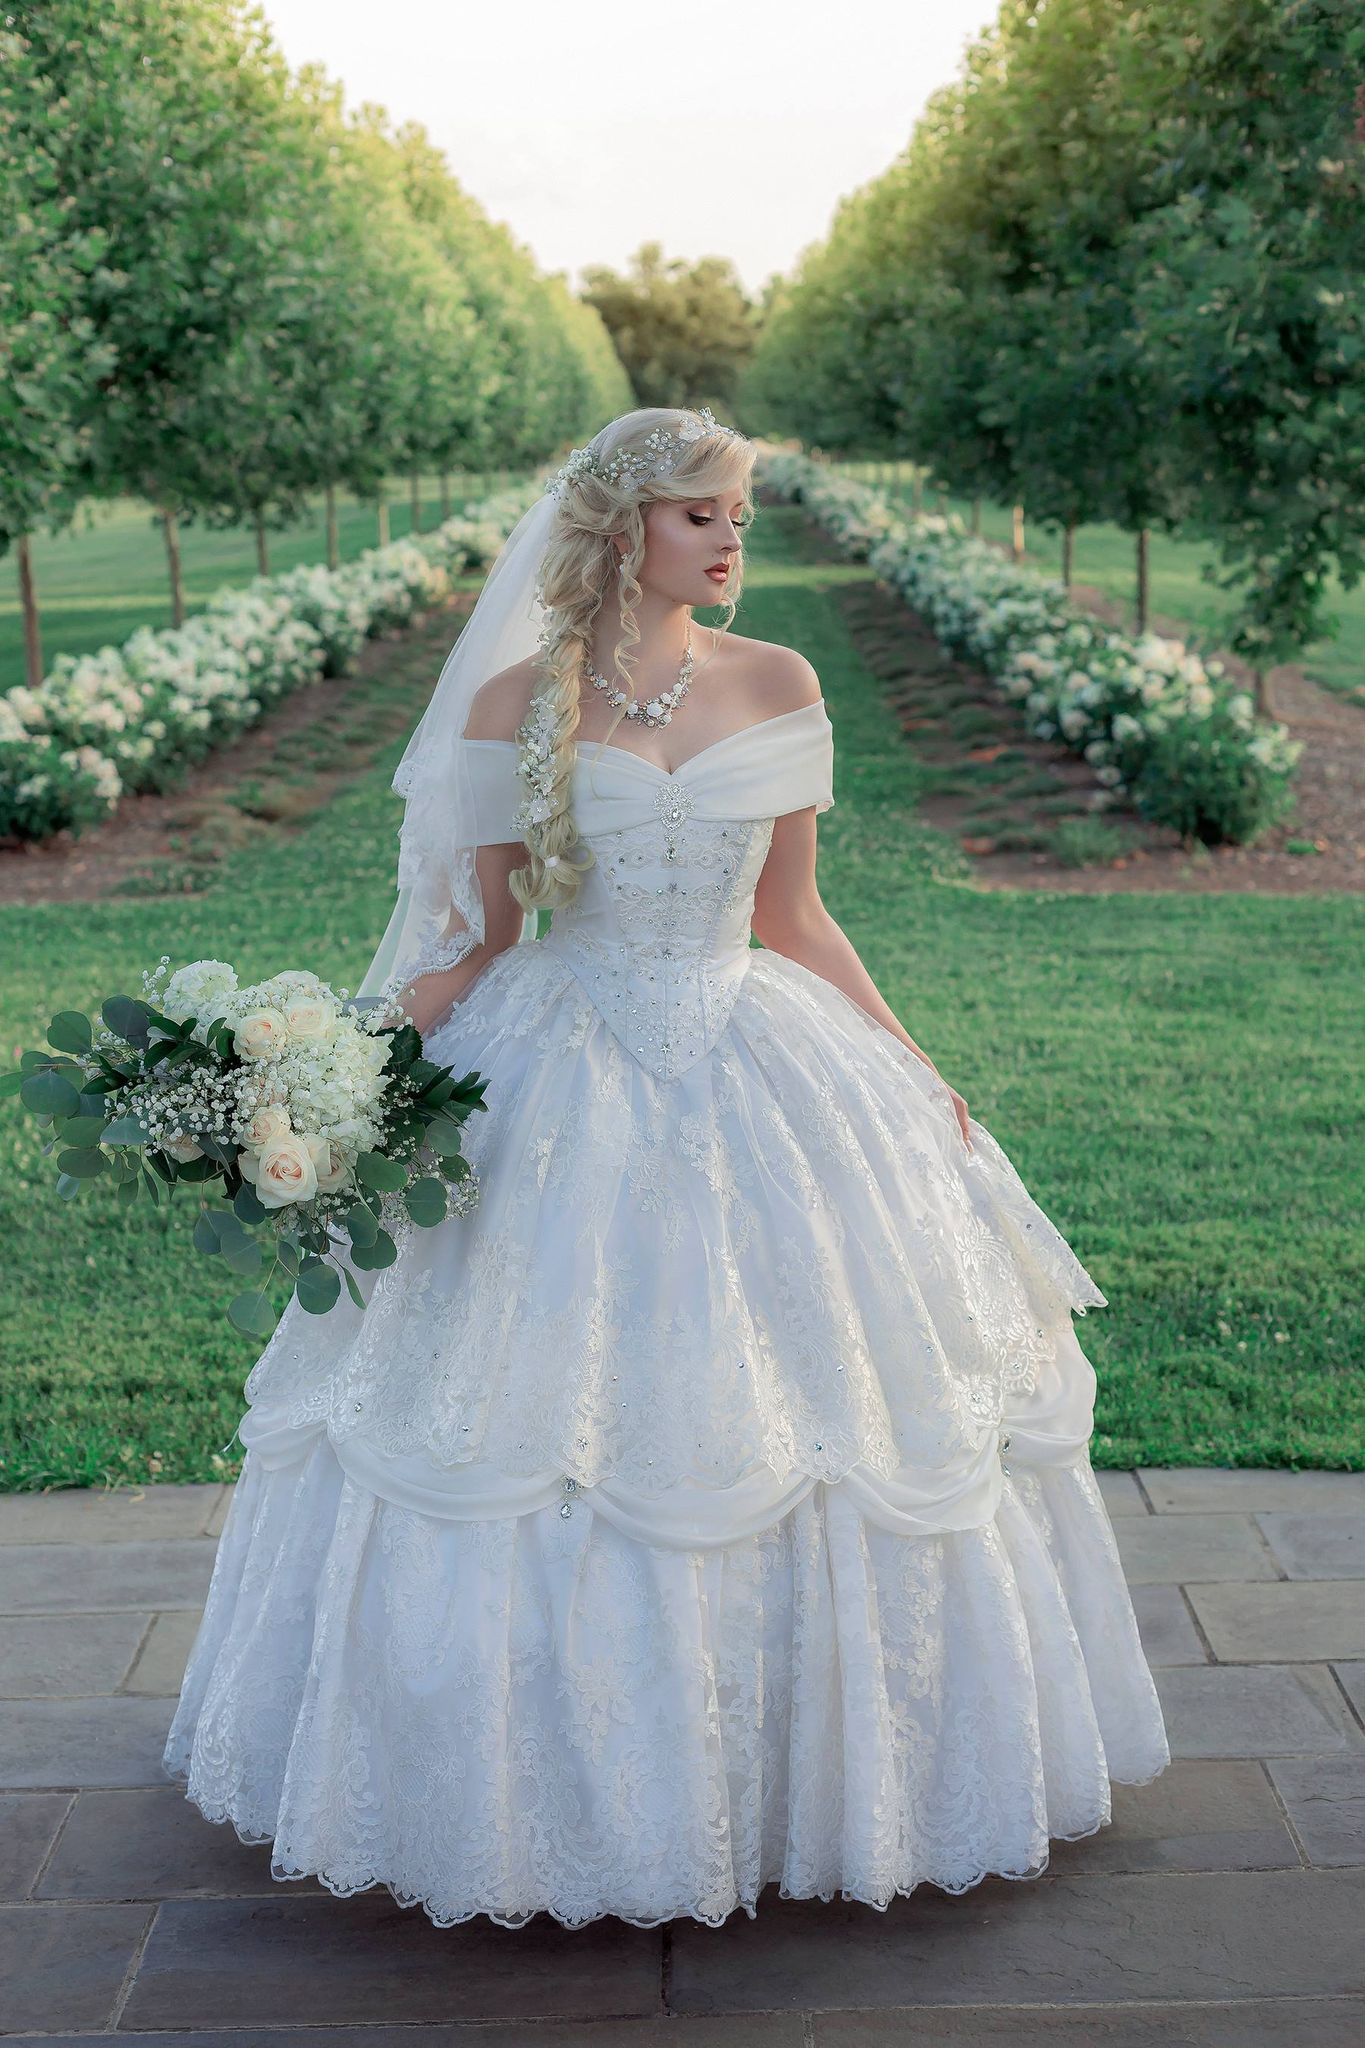 SOLD OUT Belle Lace Victorian Gown Disney Princess Wedding Gown Custom